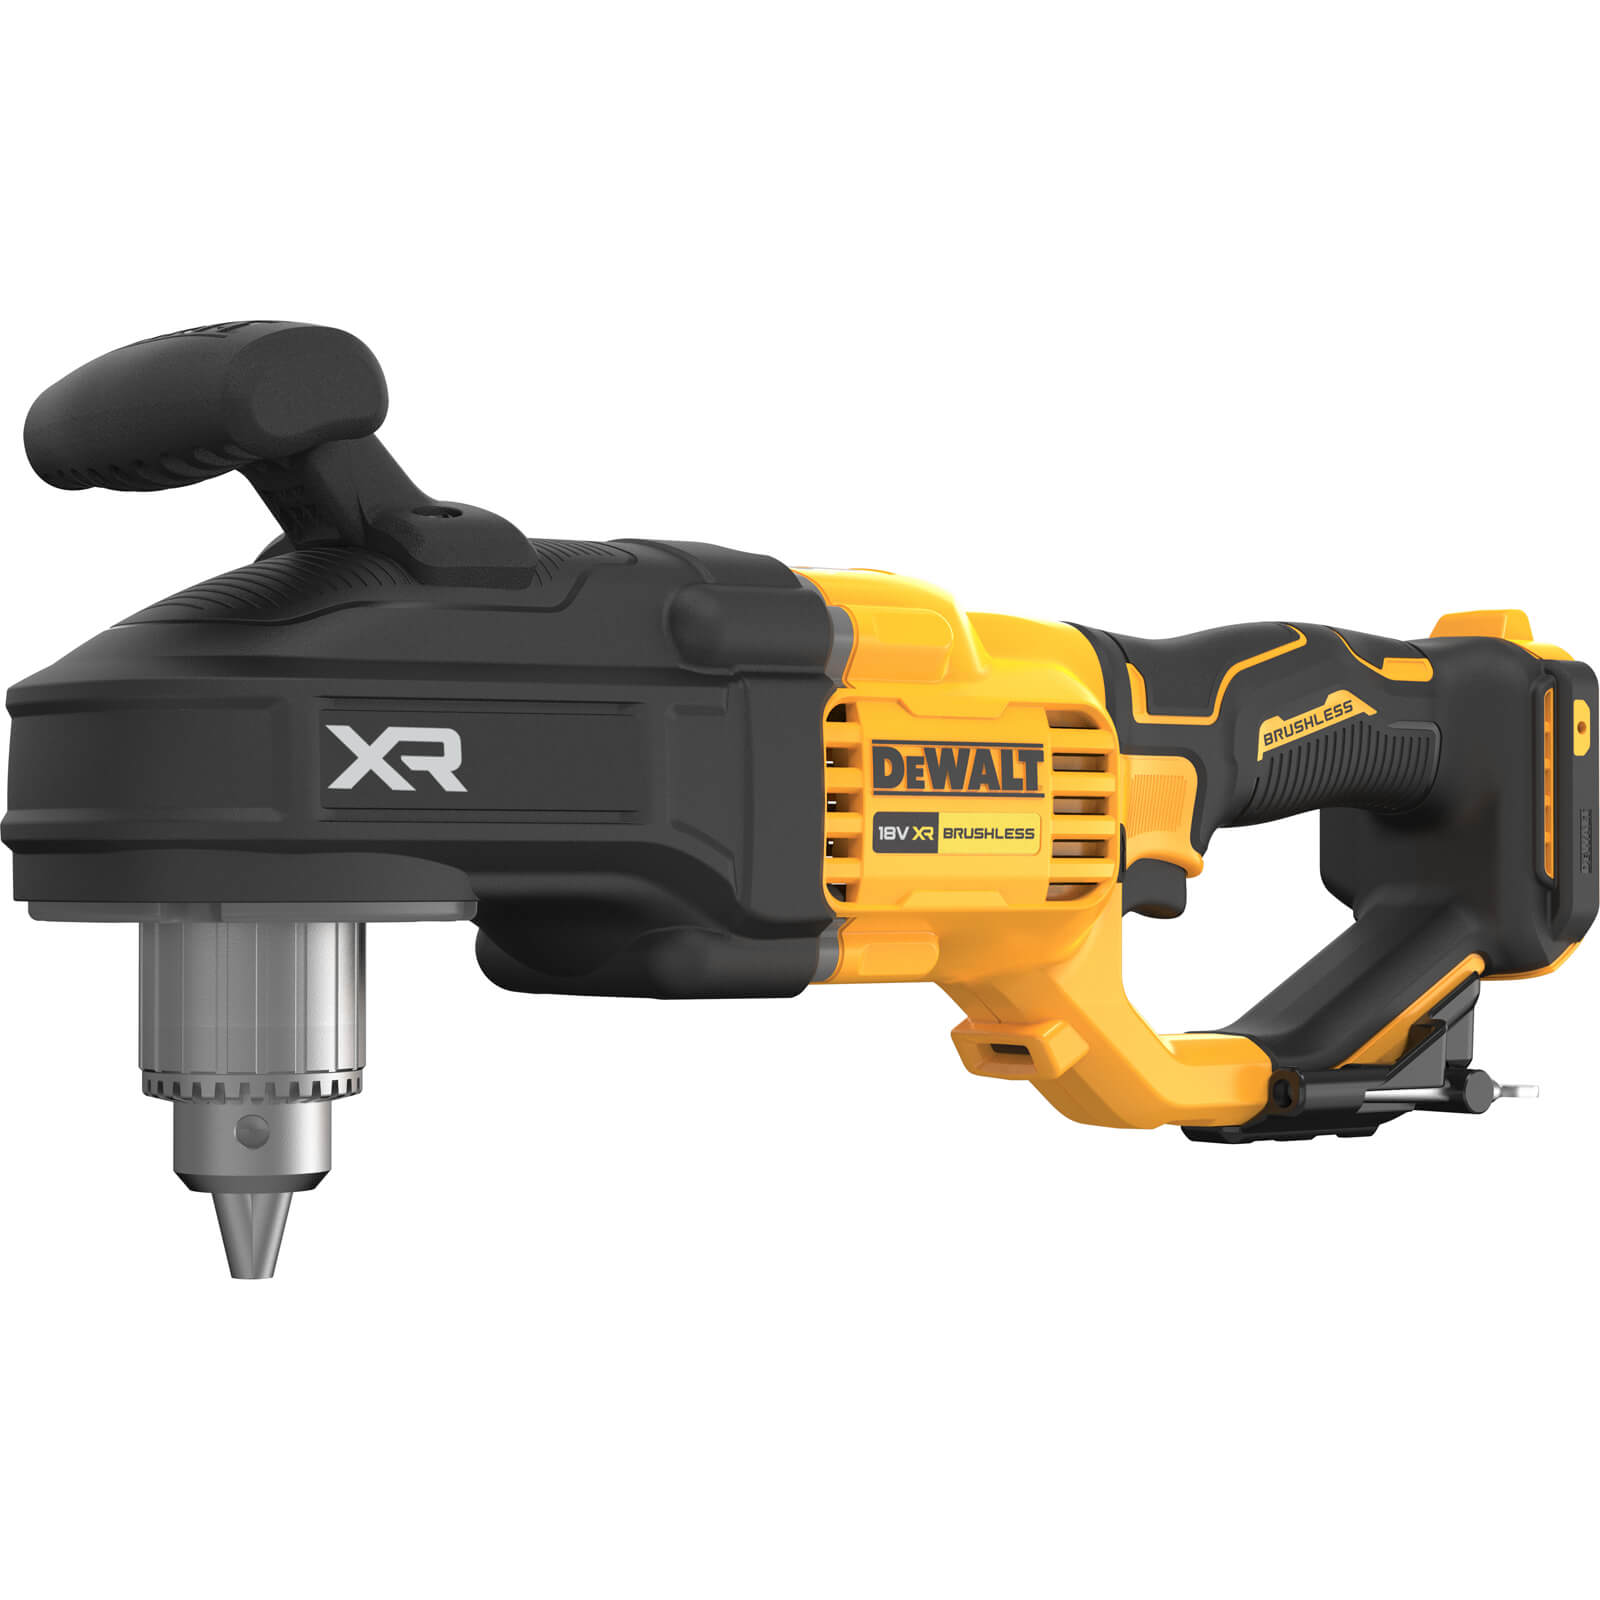 DeWalt DCD444 18v XR Cordless Stud and Joist Angle Drill No Batteries No Charger No Case